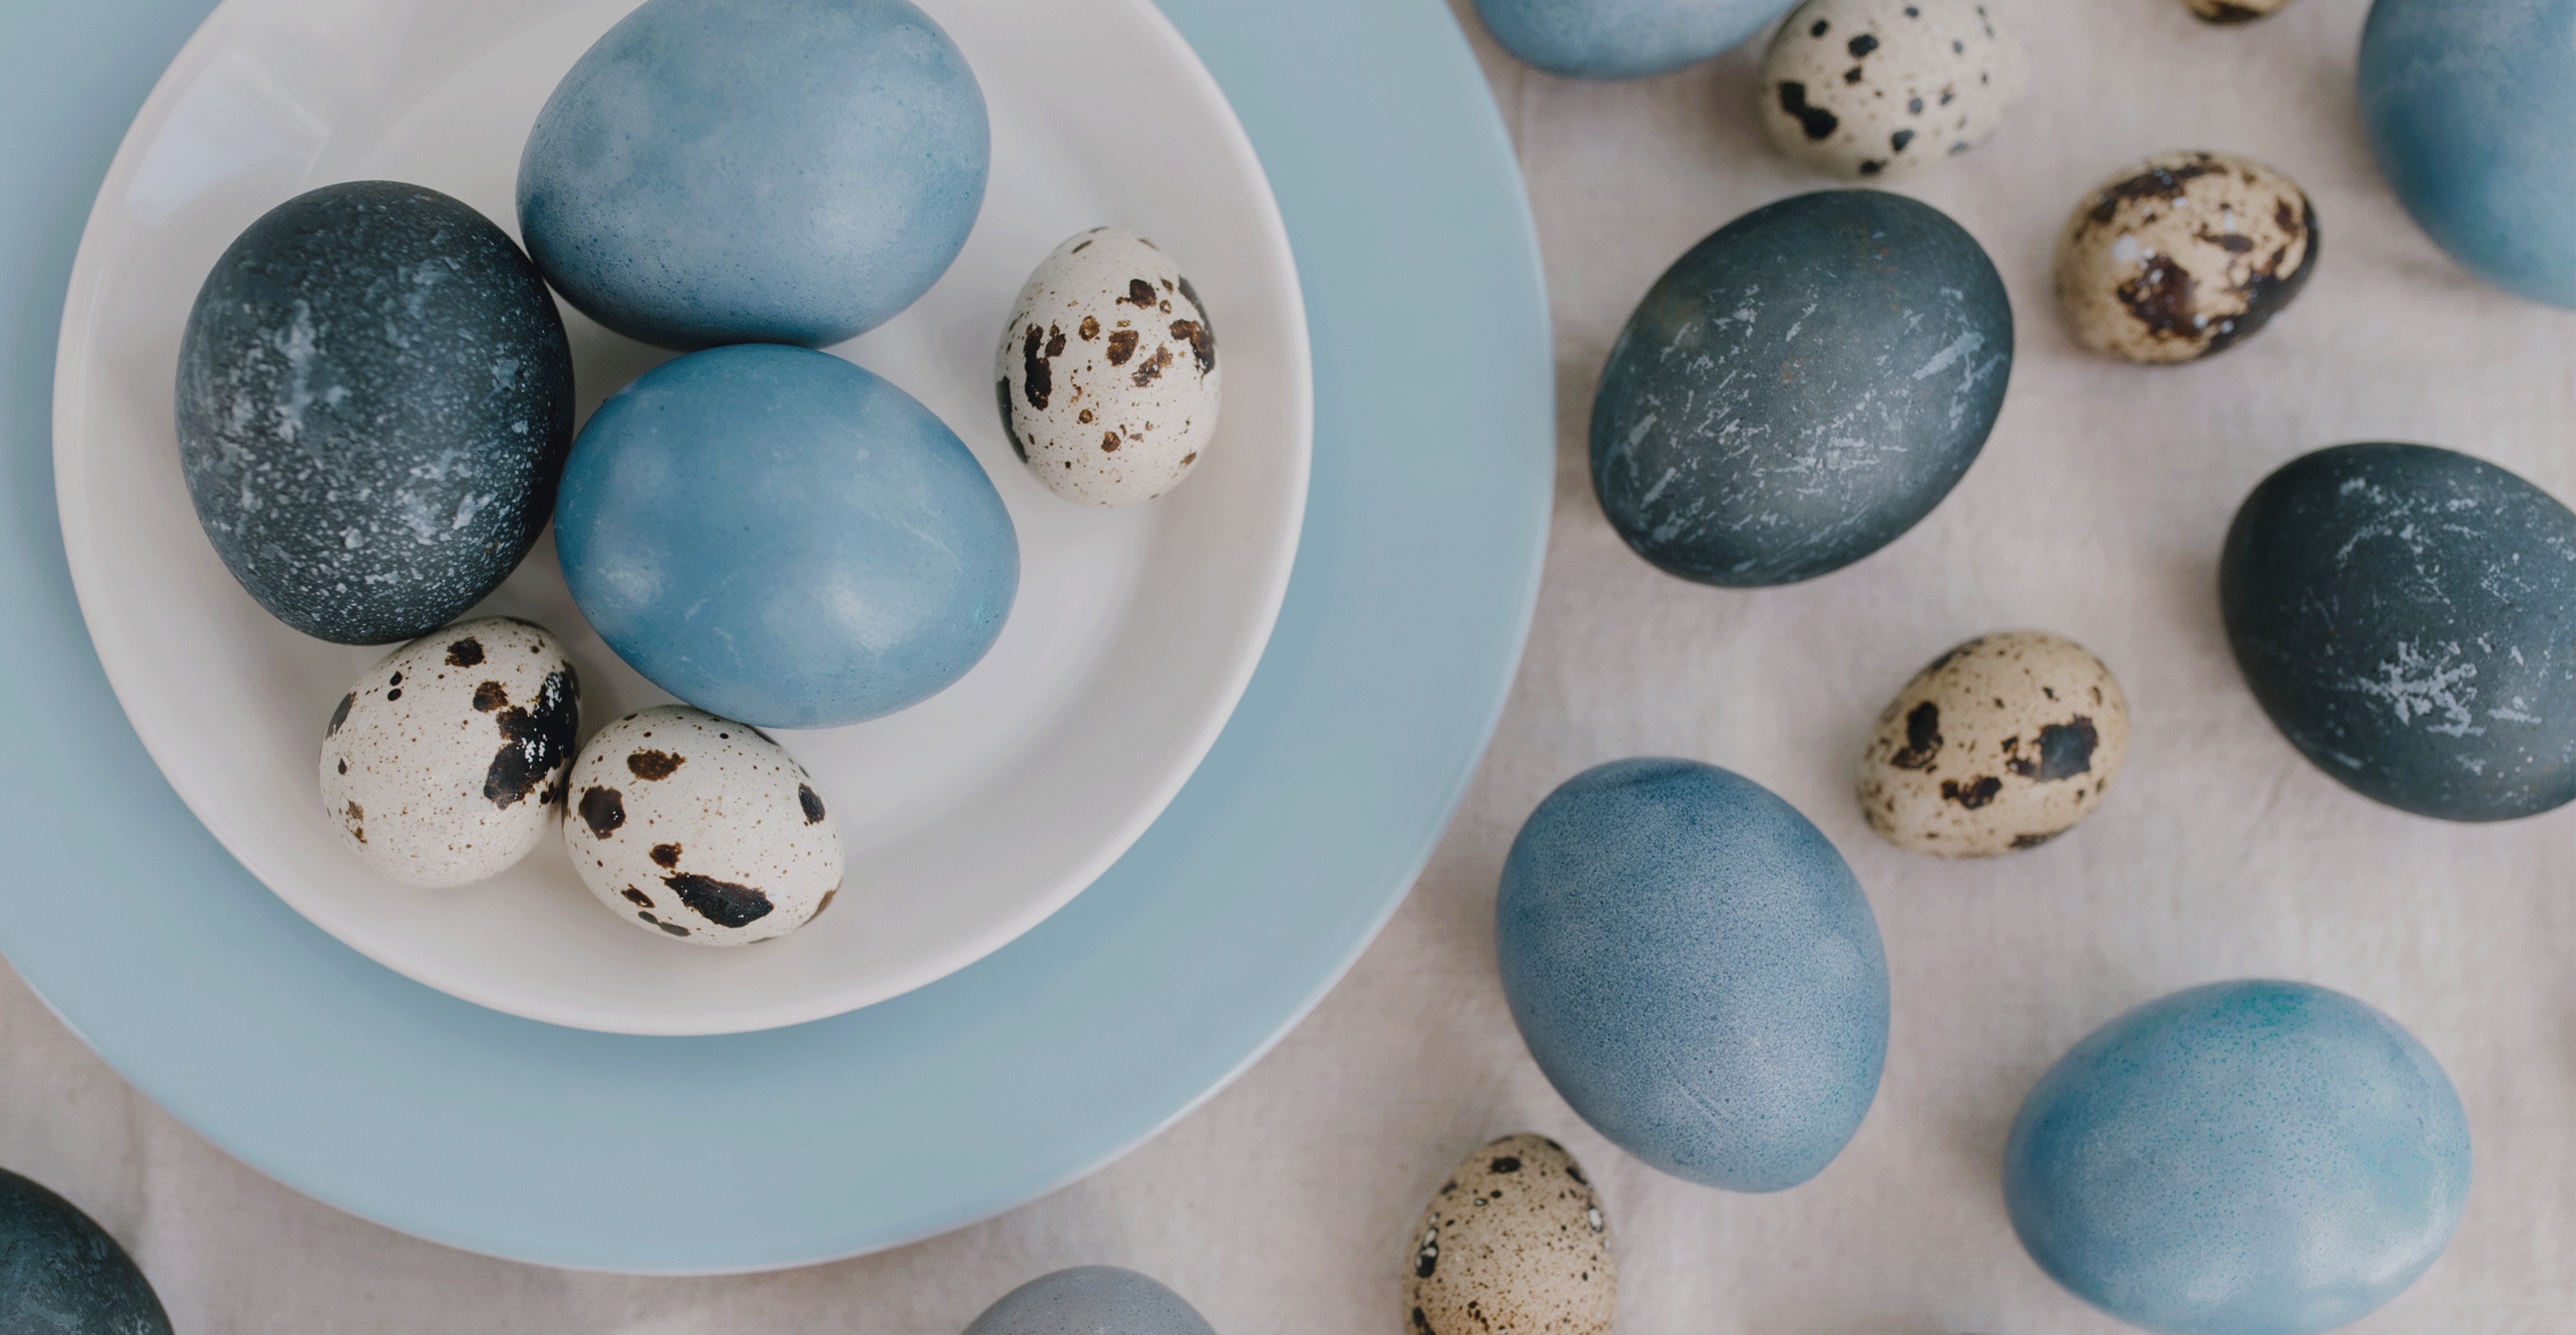 A duck egg blue easter egg plate with models overlaying and modelling a variety of women's clothing.